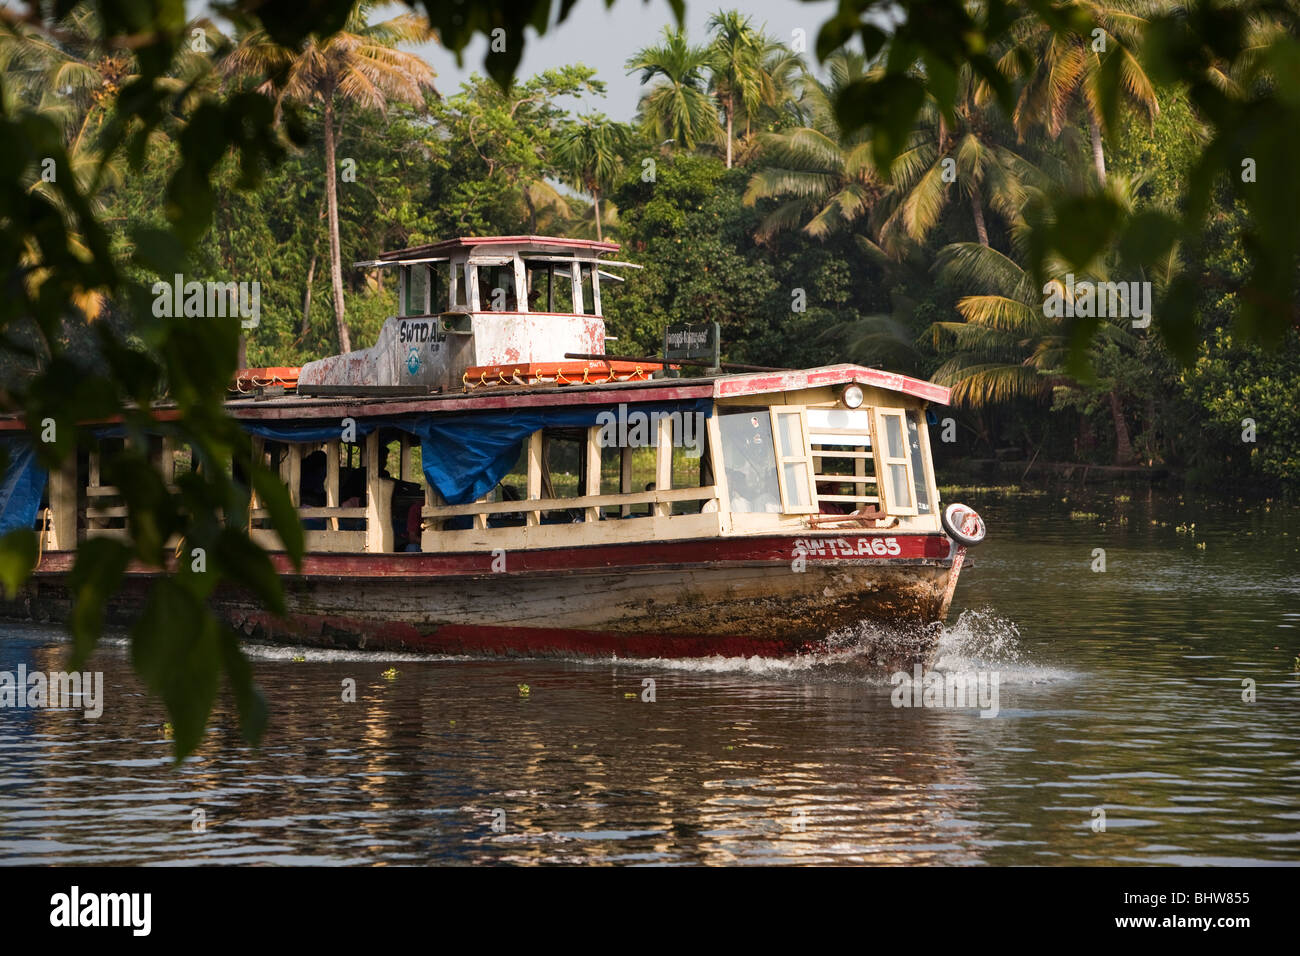 India, Kerala, Alleppey, Alappuzha backwaters, local inter-island ferry Stock Photo